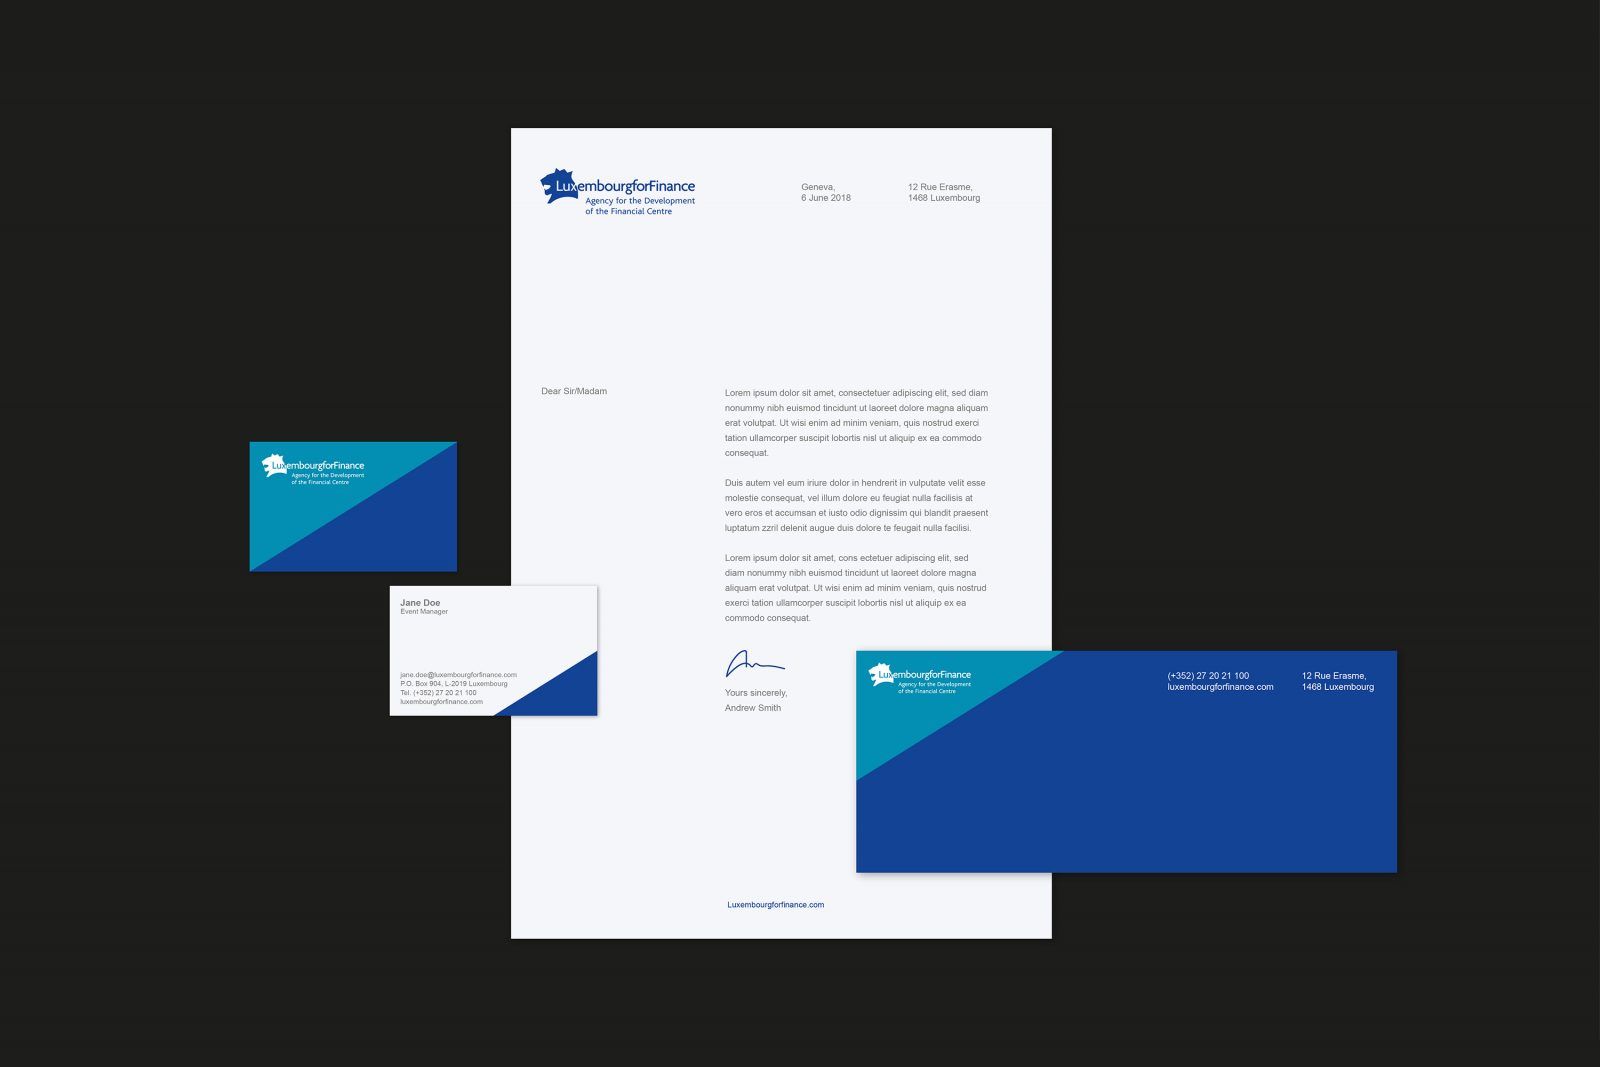 Luxembourg for Finance Logo design shown across letterhead paper, business cards and complement slip.